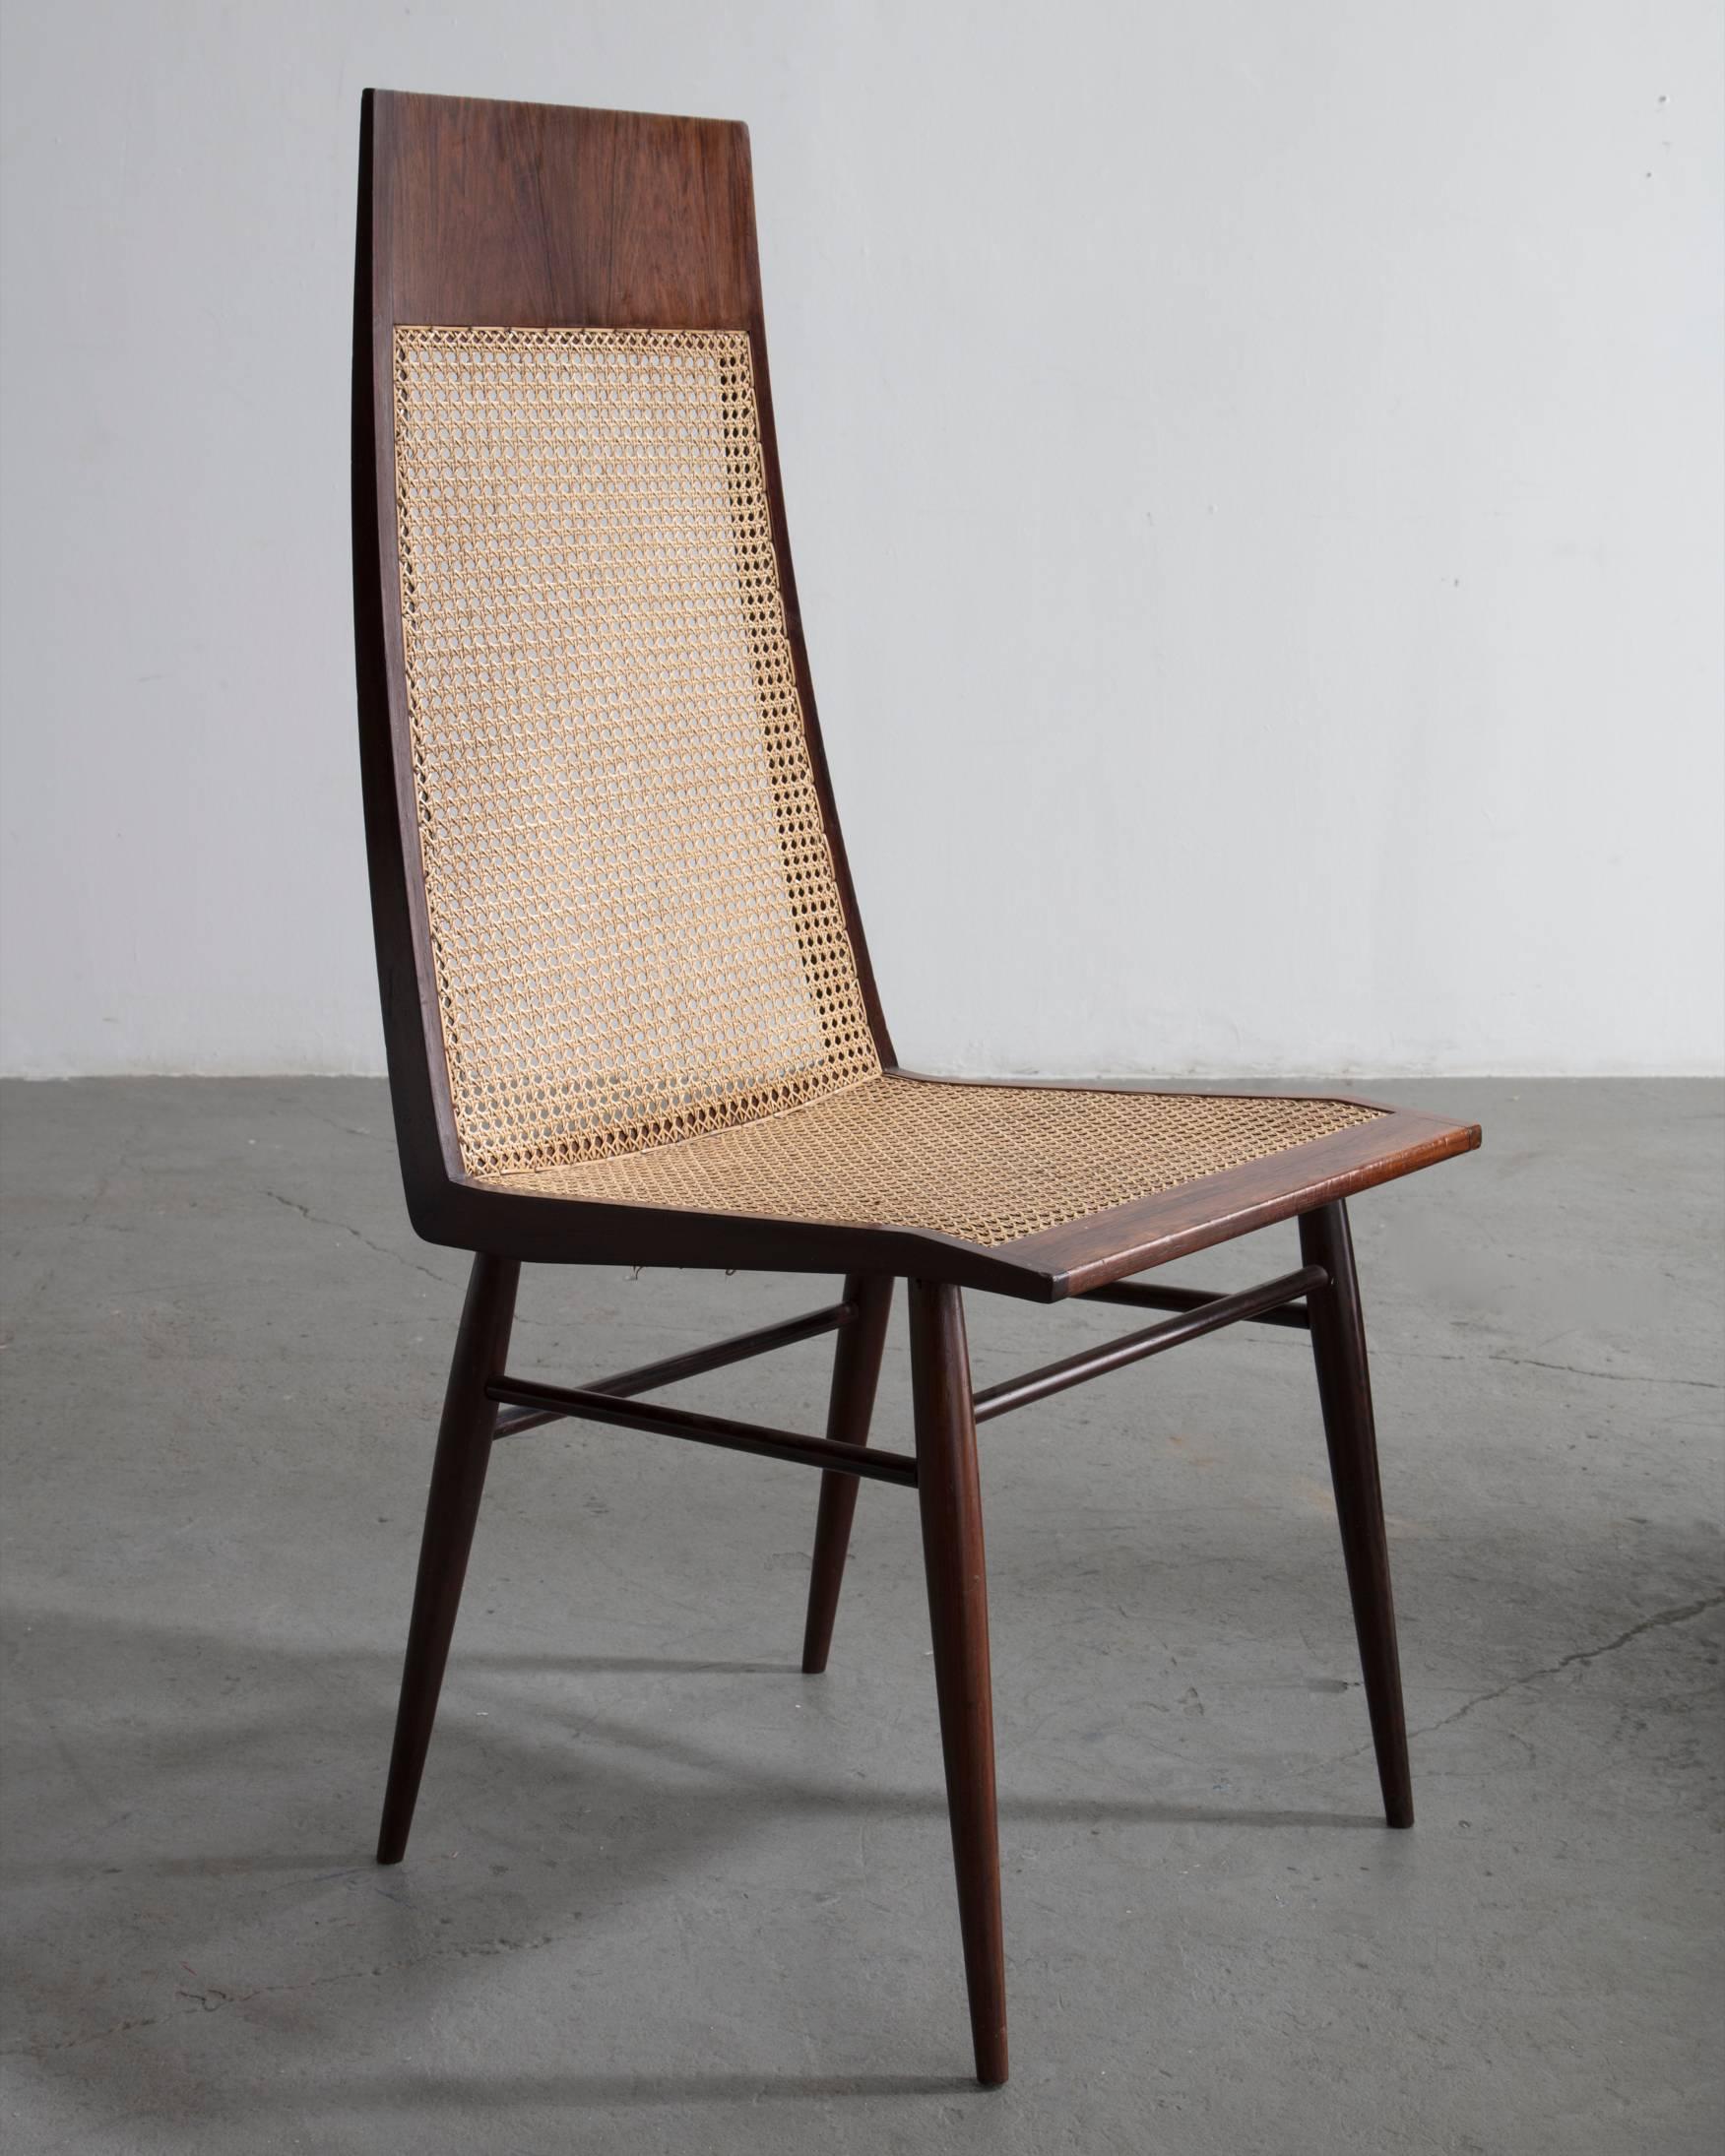 Set of eight (8) dining chairs in rosewood with cane seat and back. Designed by Joaquim Tenreiro, Brazil, circa 1949 (seat: 17.75